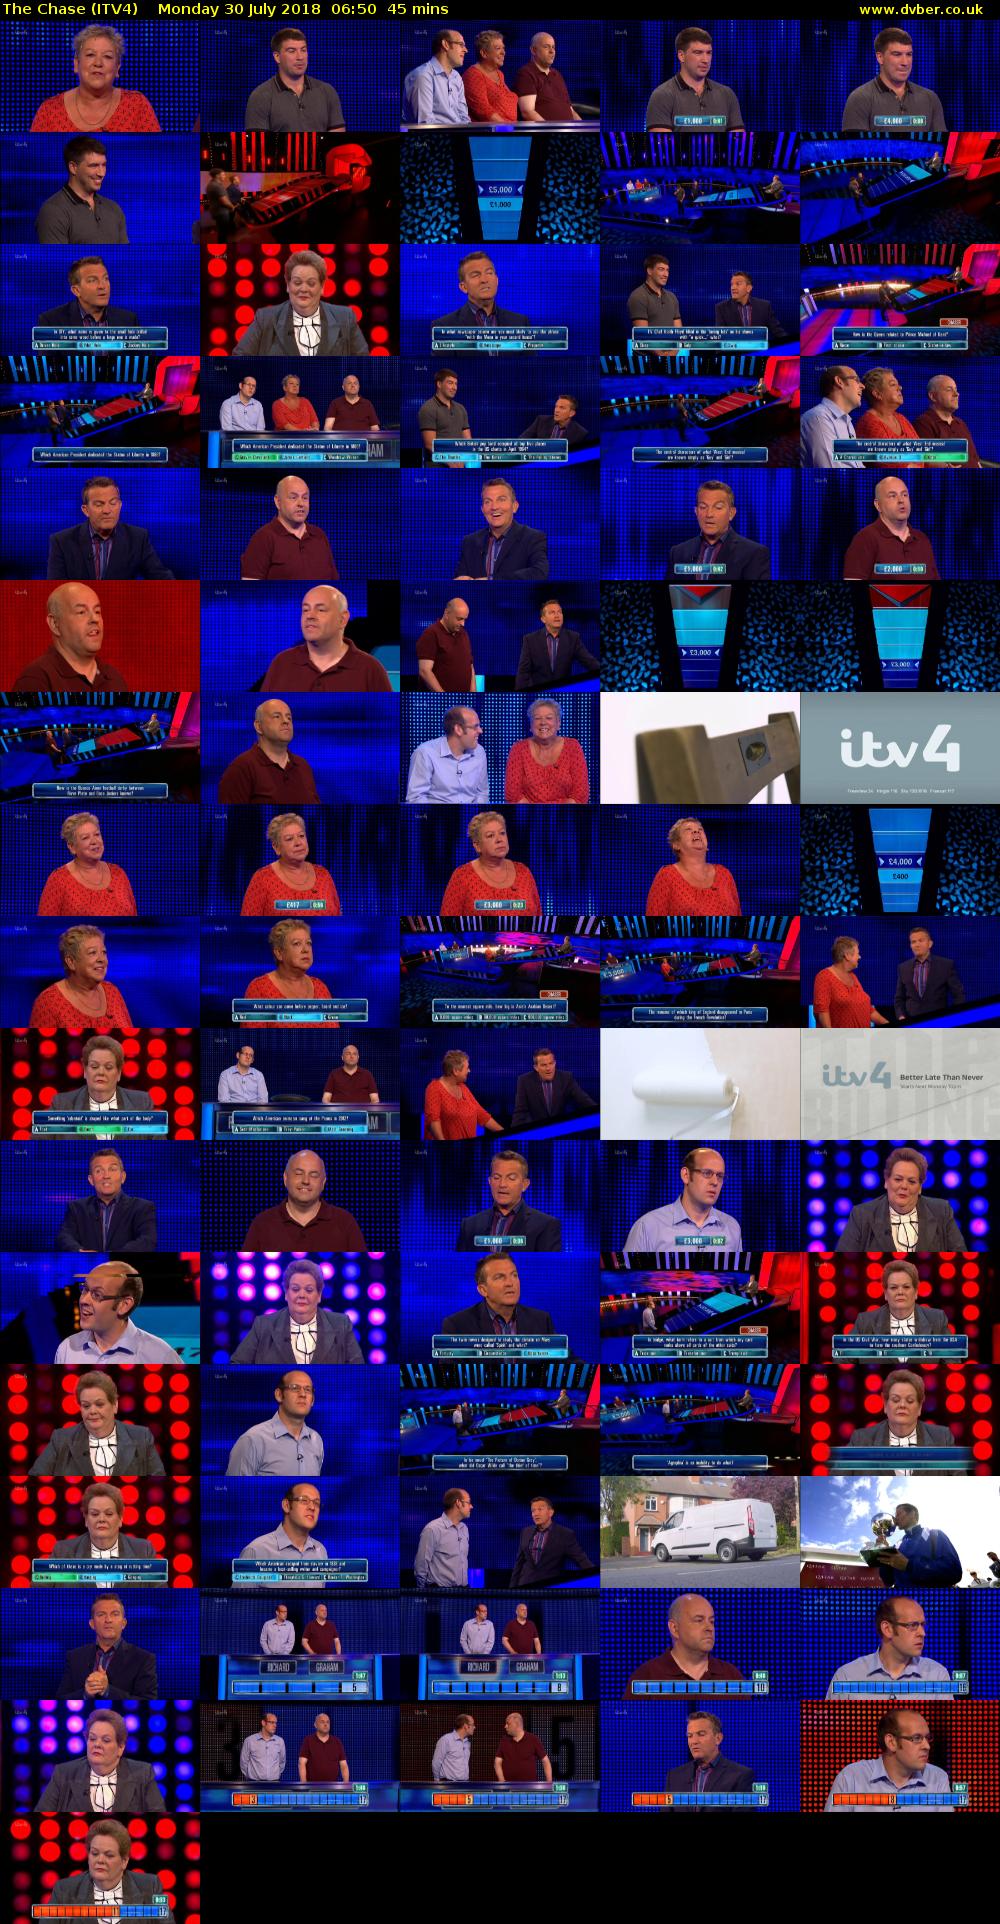 The Chase (ITV4) Monday 30 July 2018 06:50 - 07:35